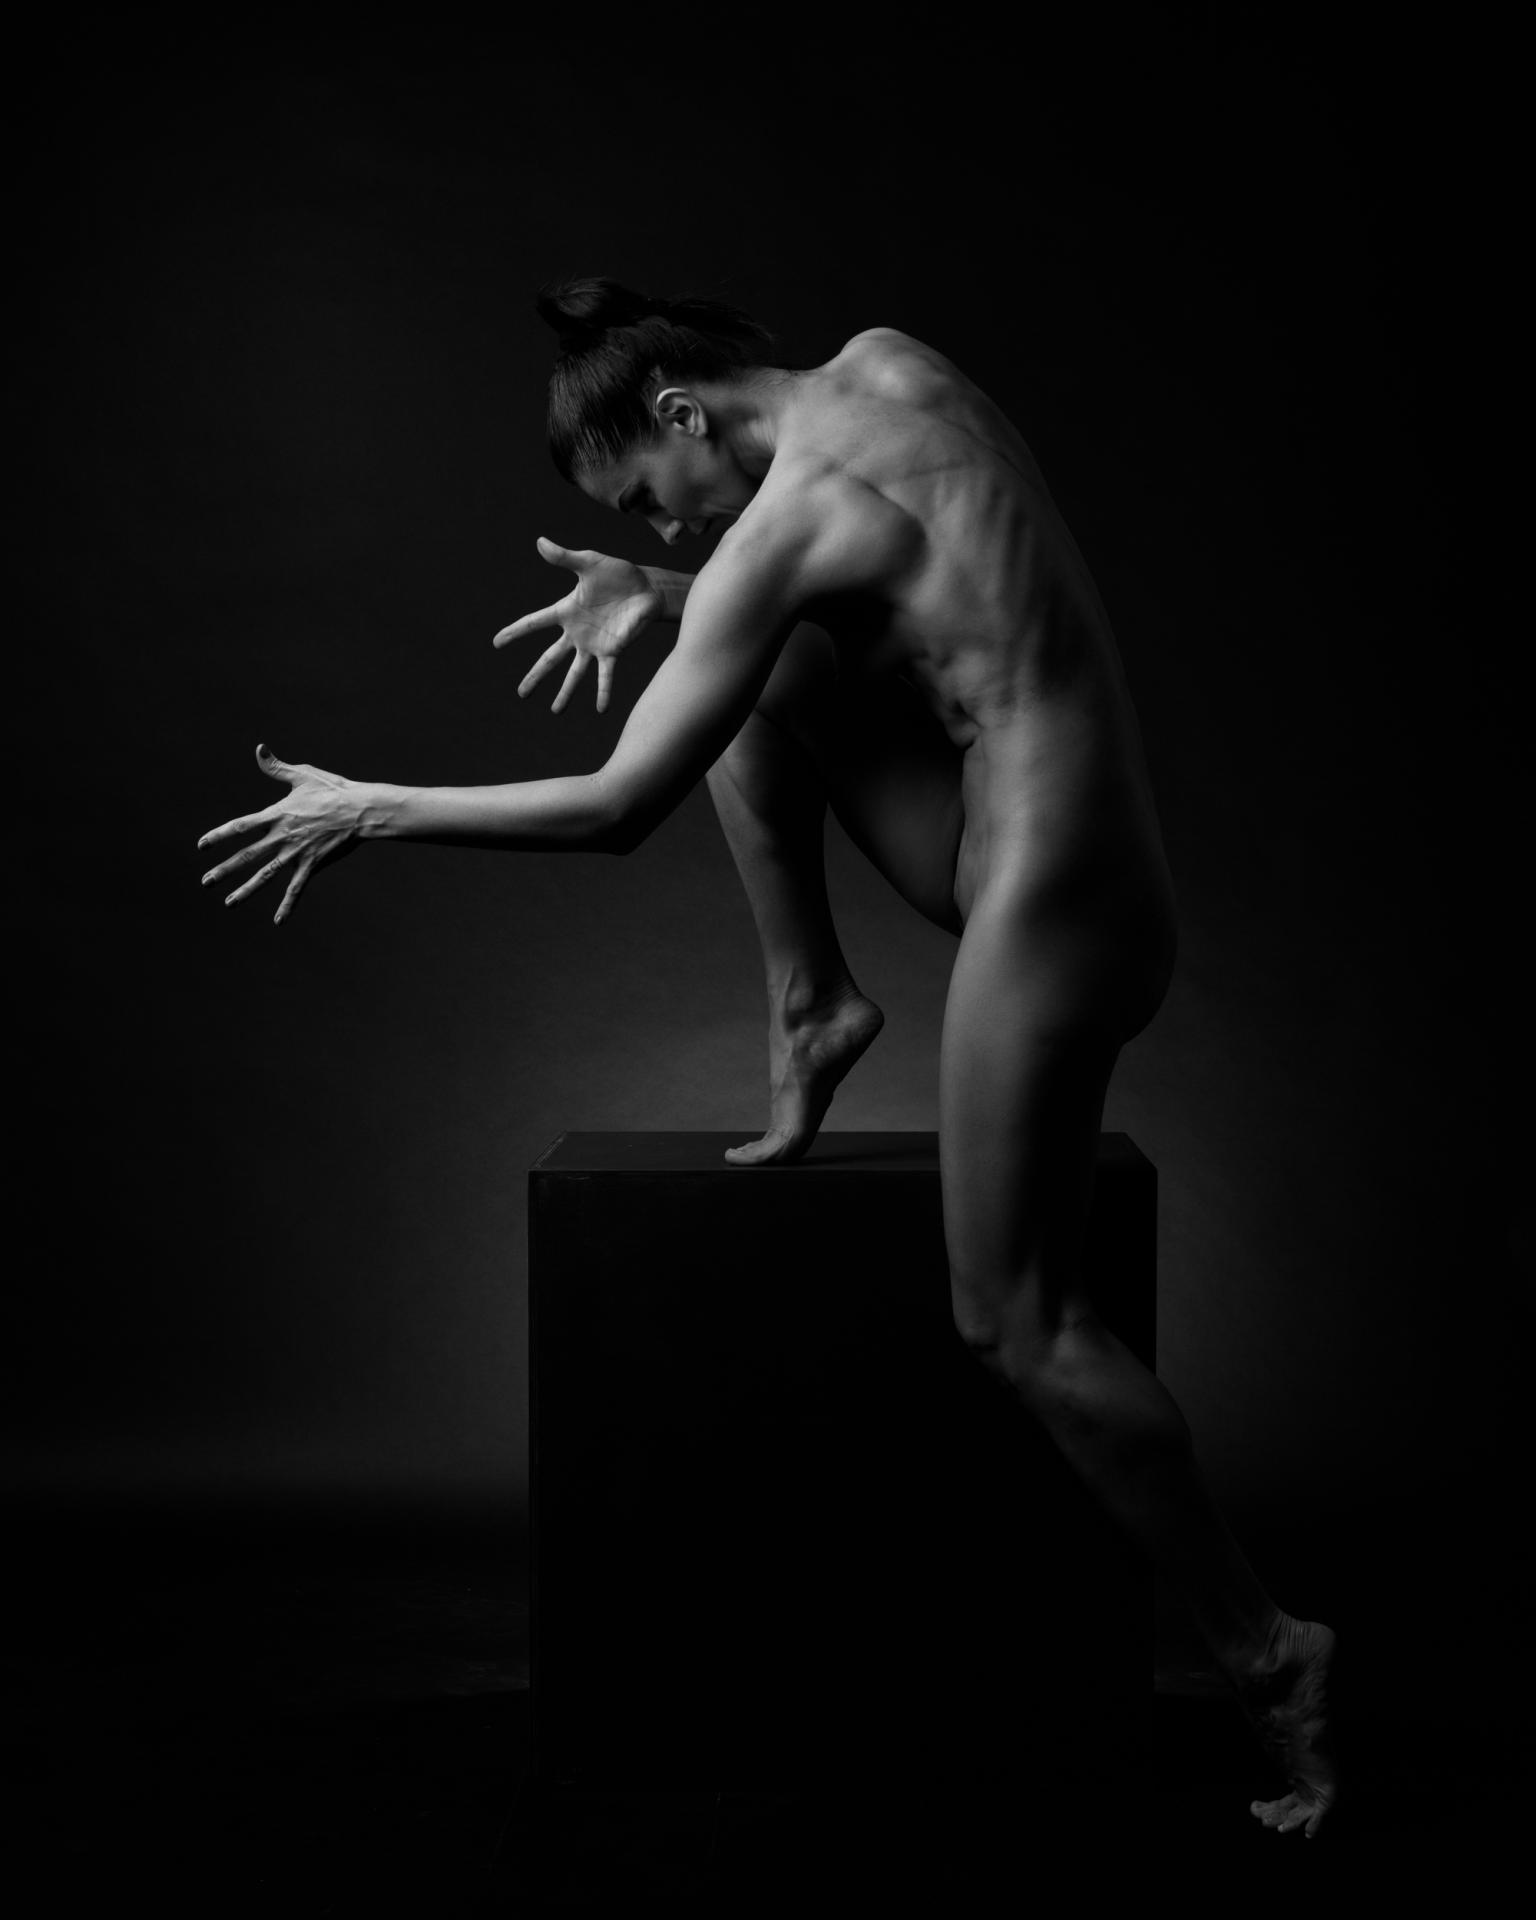 New York Photography Awards Winner - Postures Of The Naked Self